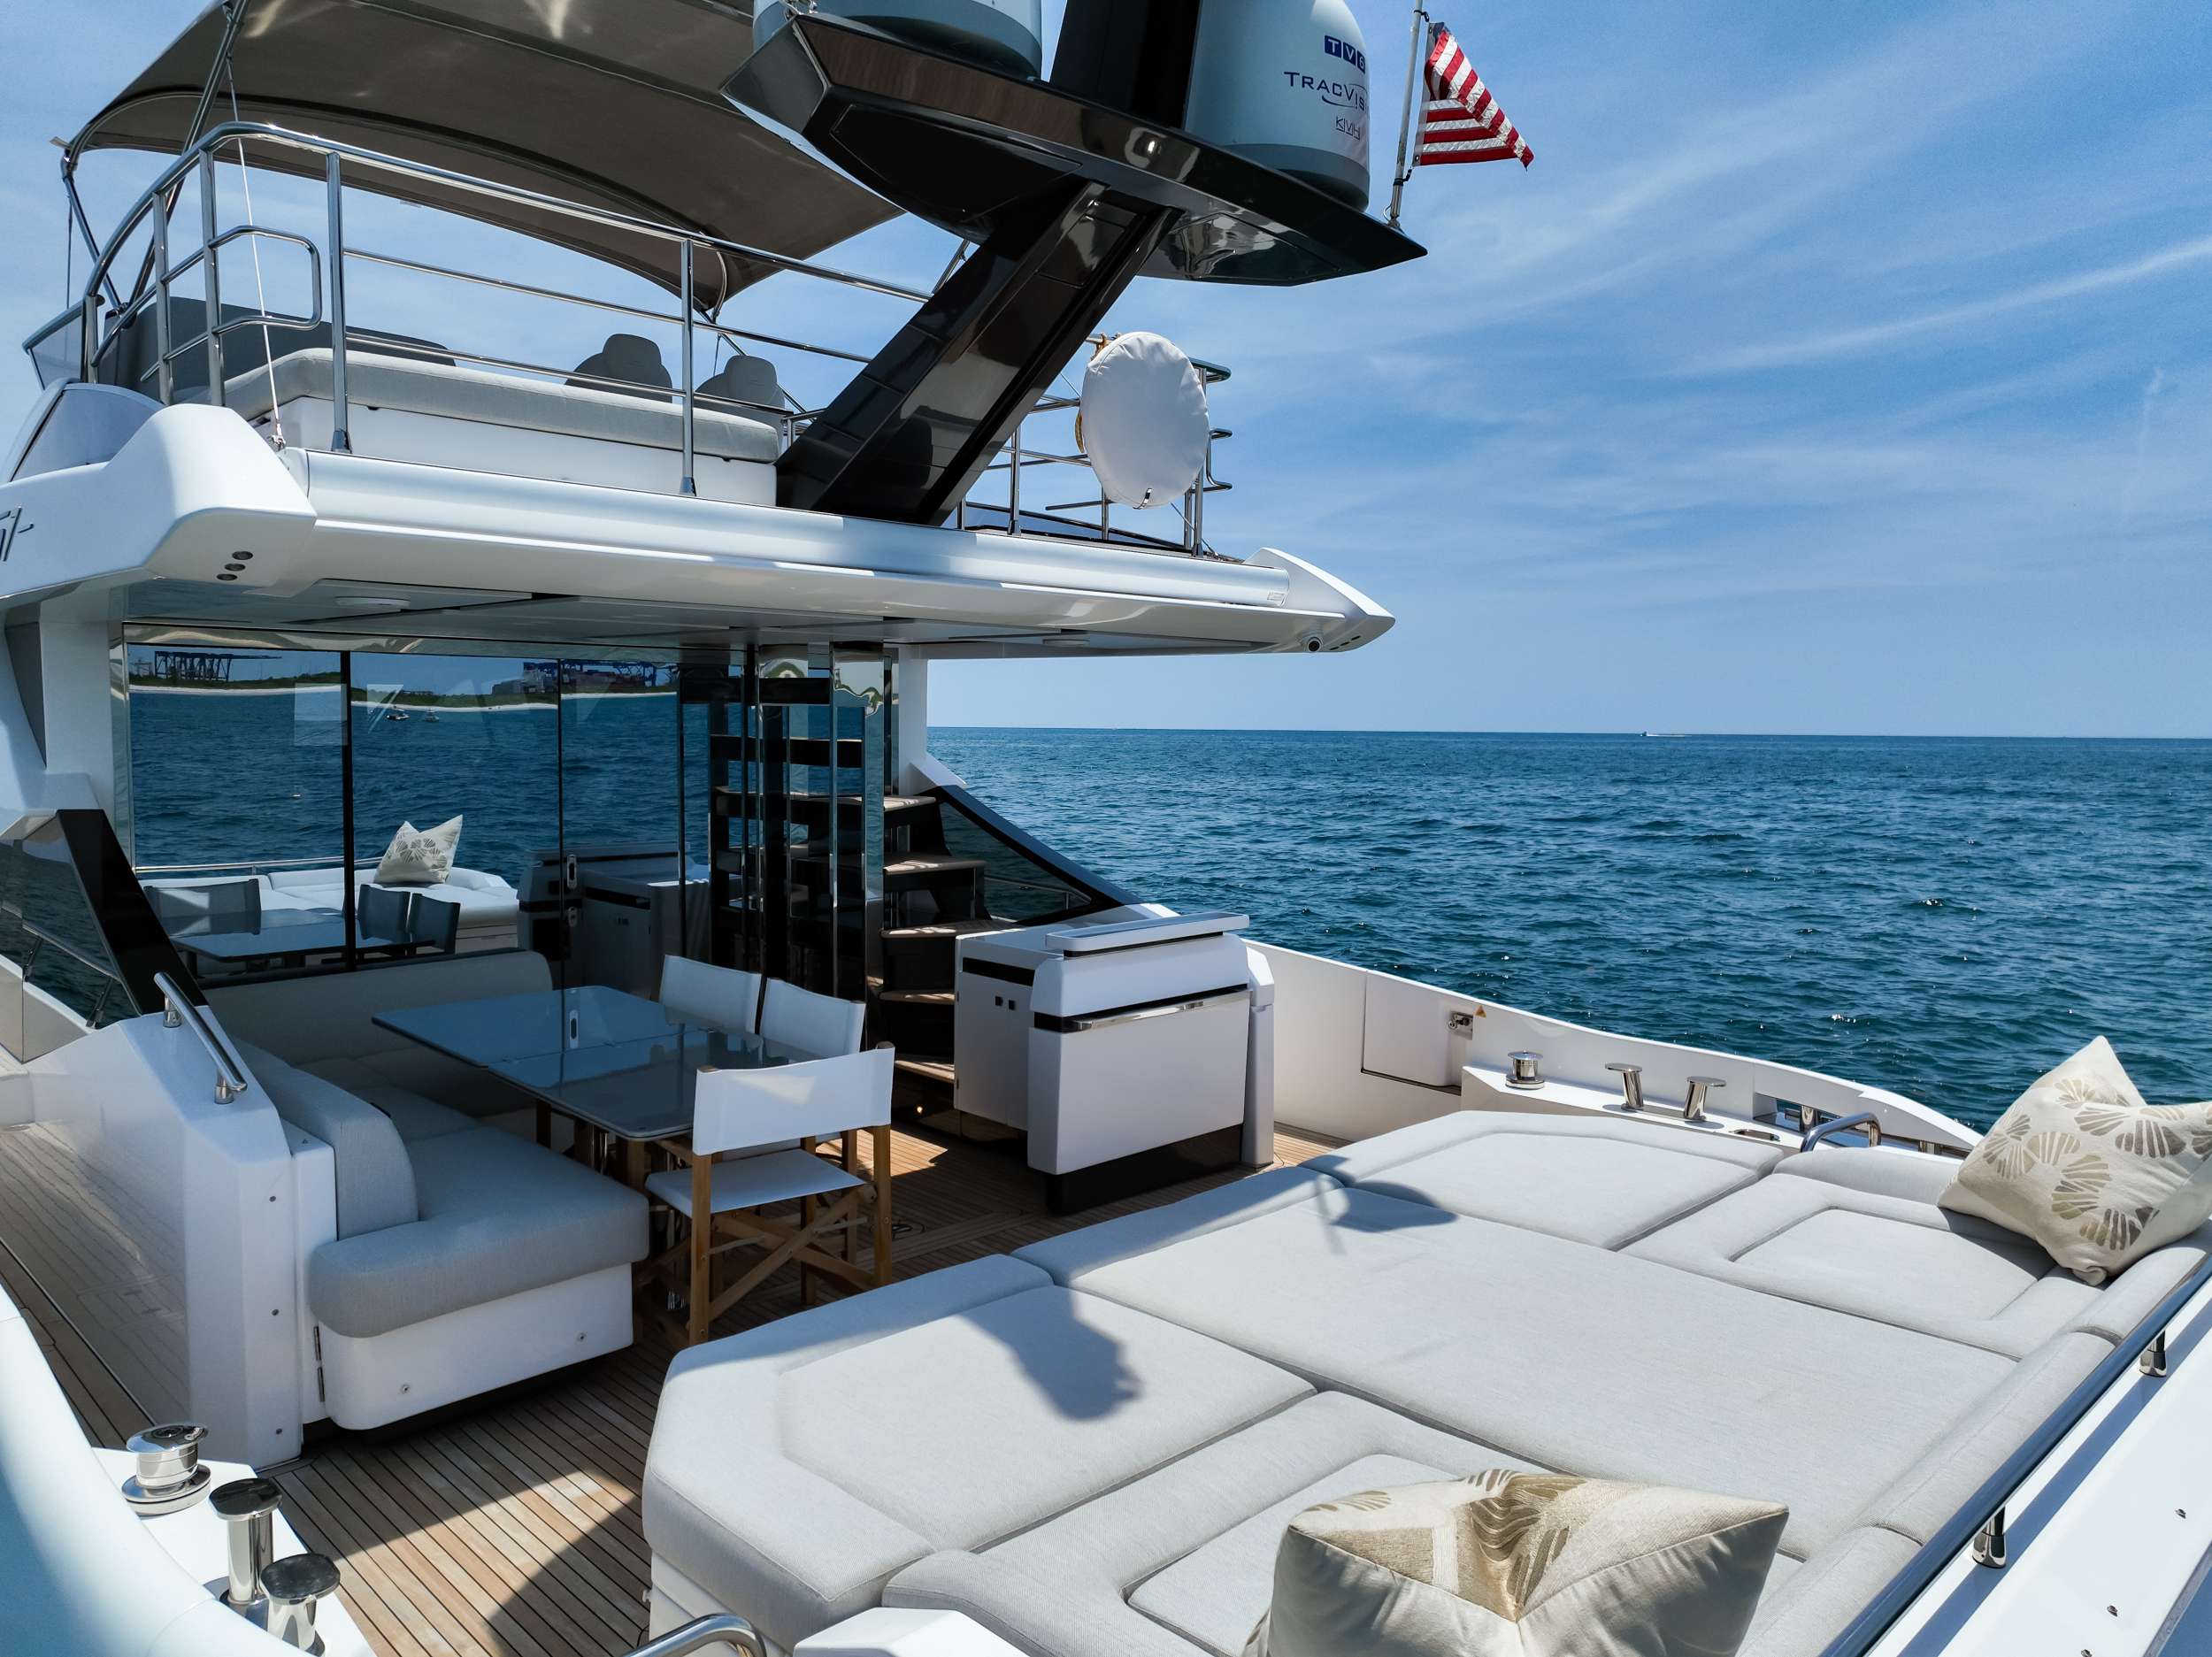 Another Chance II - Yacht Charter USA & Boat hire in Florida 4